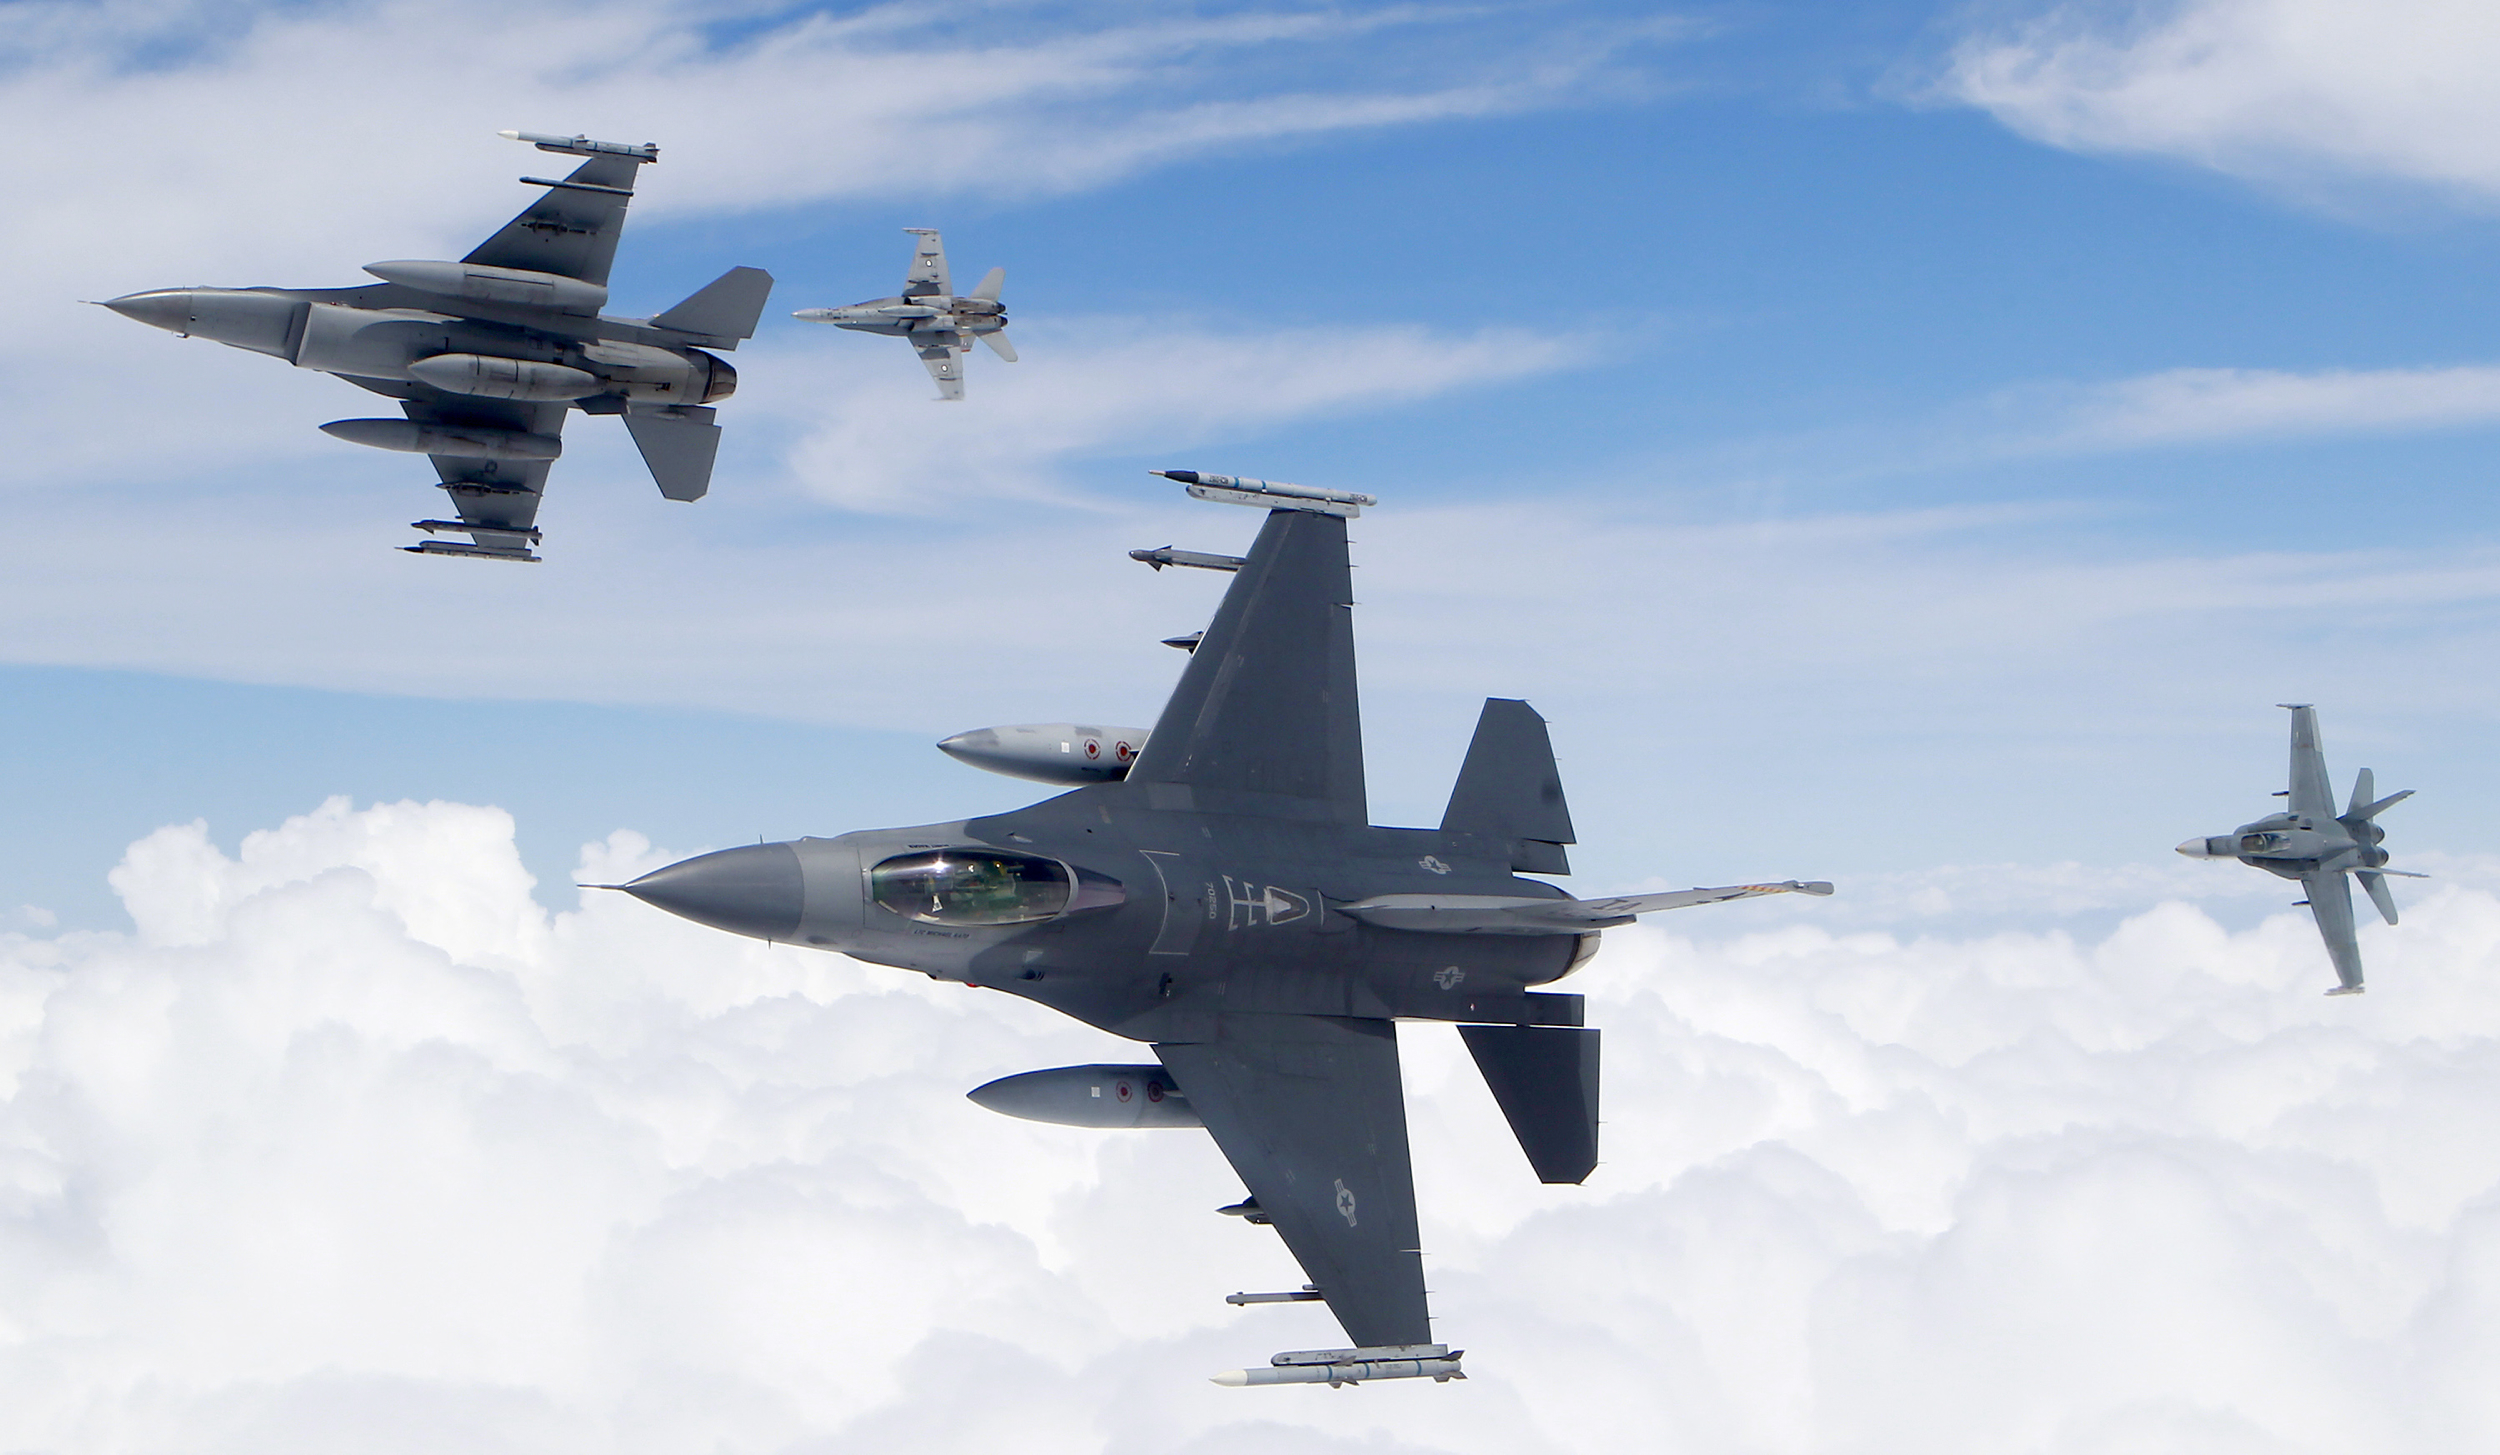 F-16 Fighting Falcon and F/A-18 Hornet jet fighters in a military wallpaper.